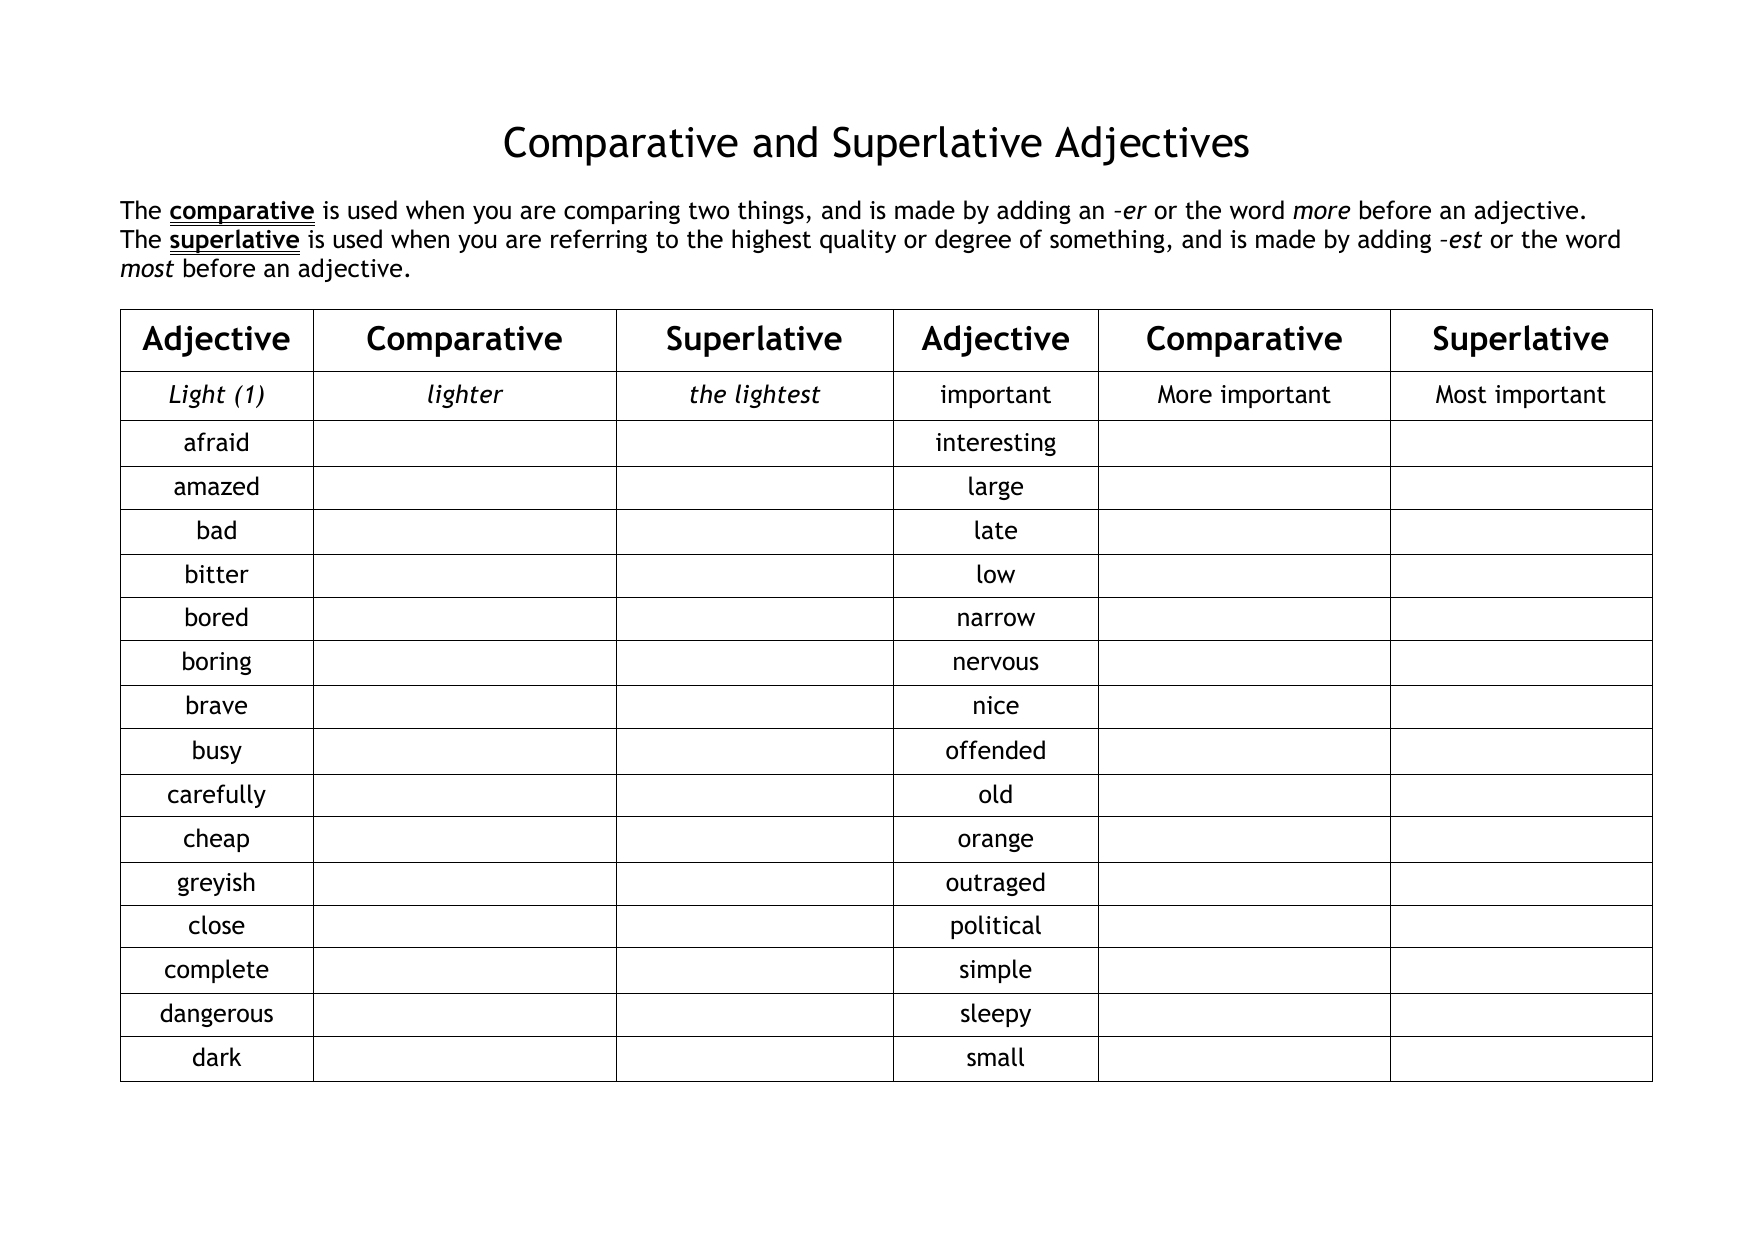 Worksheet On Comparative And Superlative Adjectives